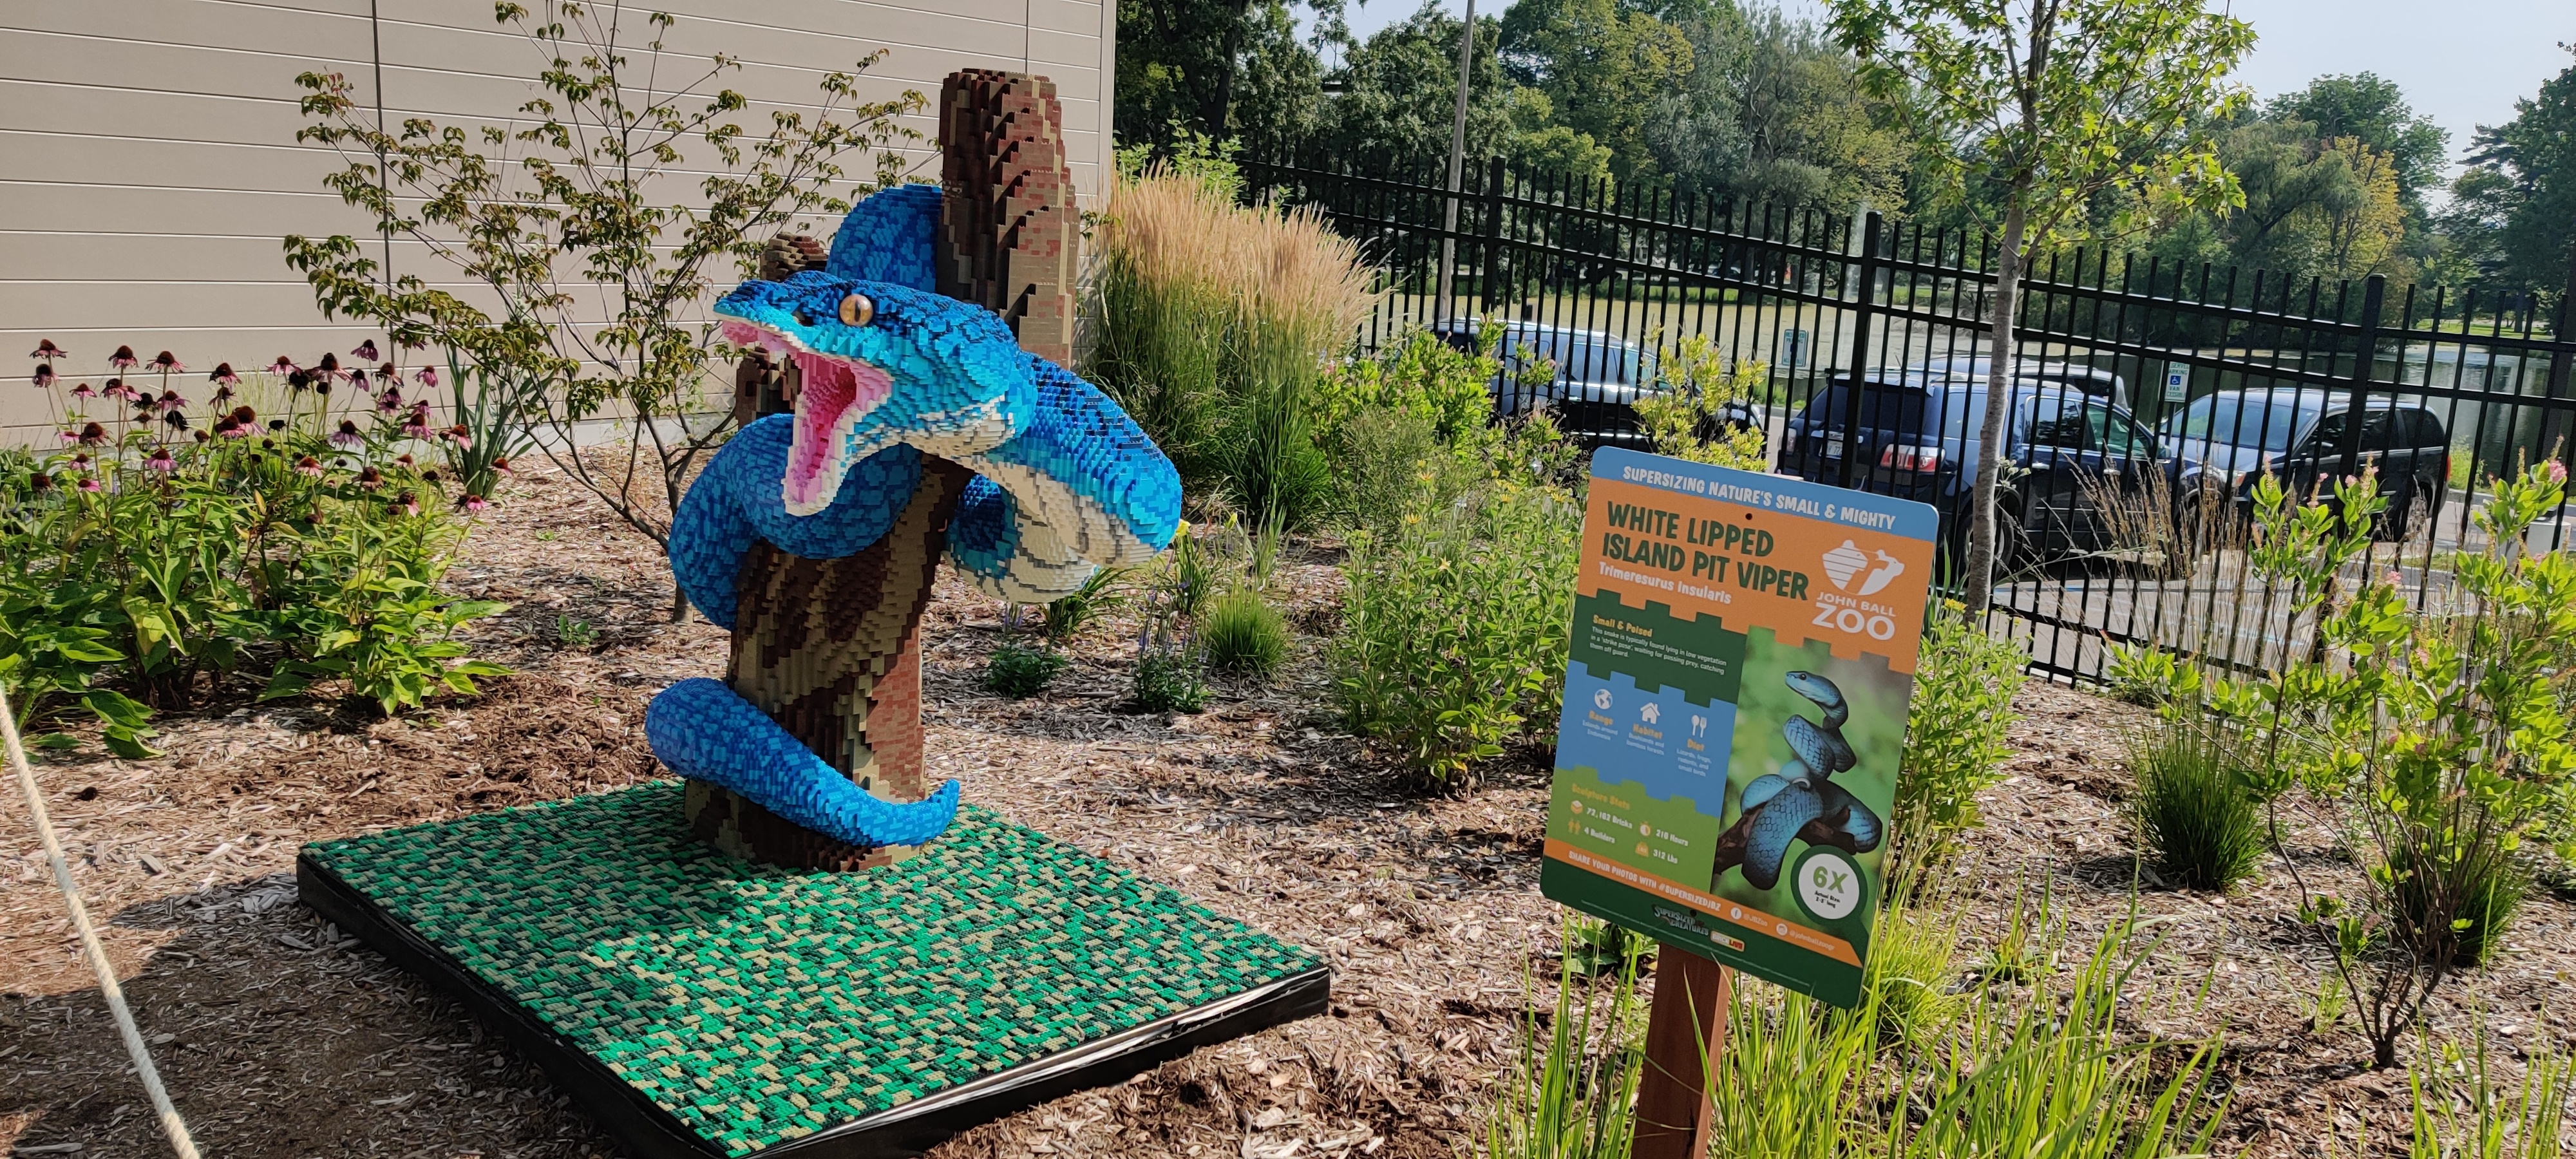 A white lipped island pit viper made from LEGO